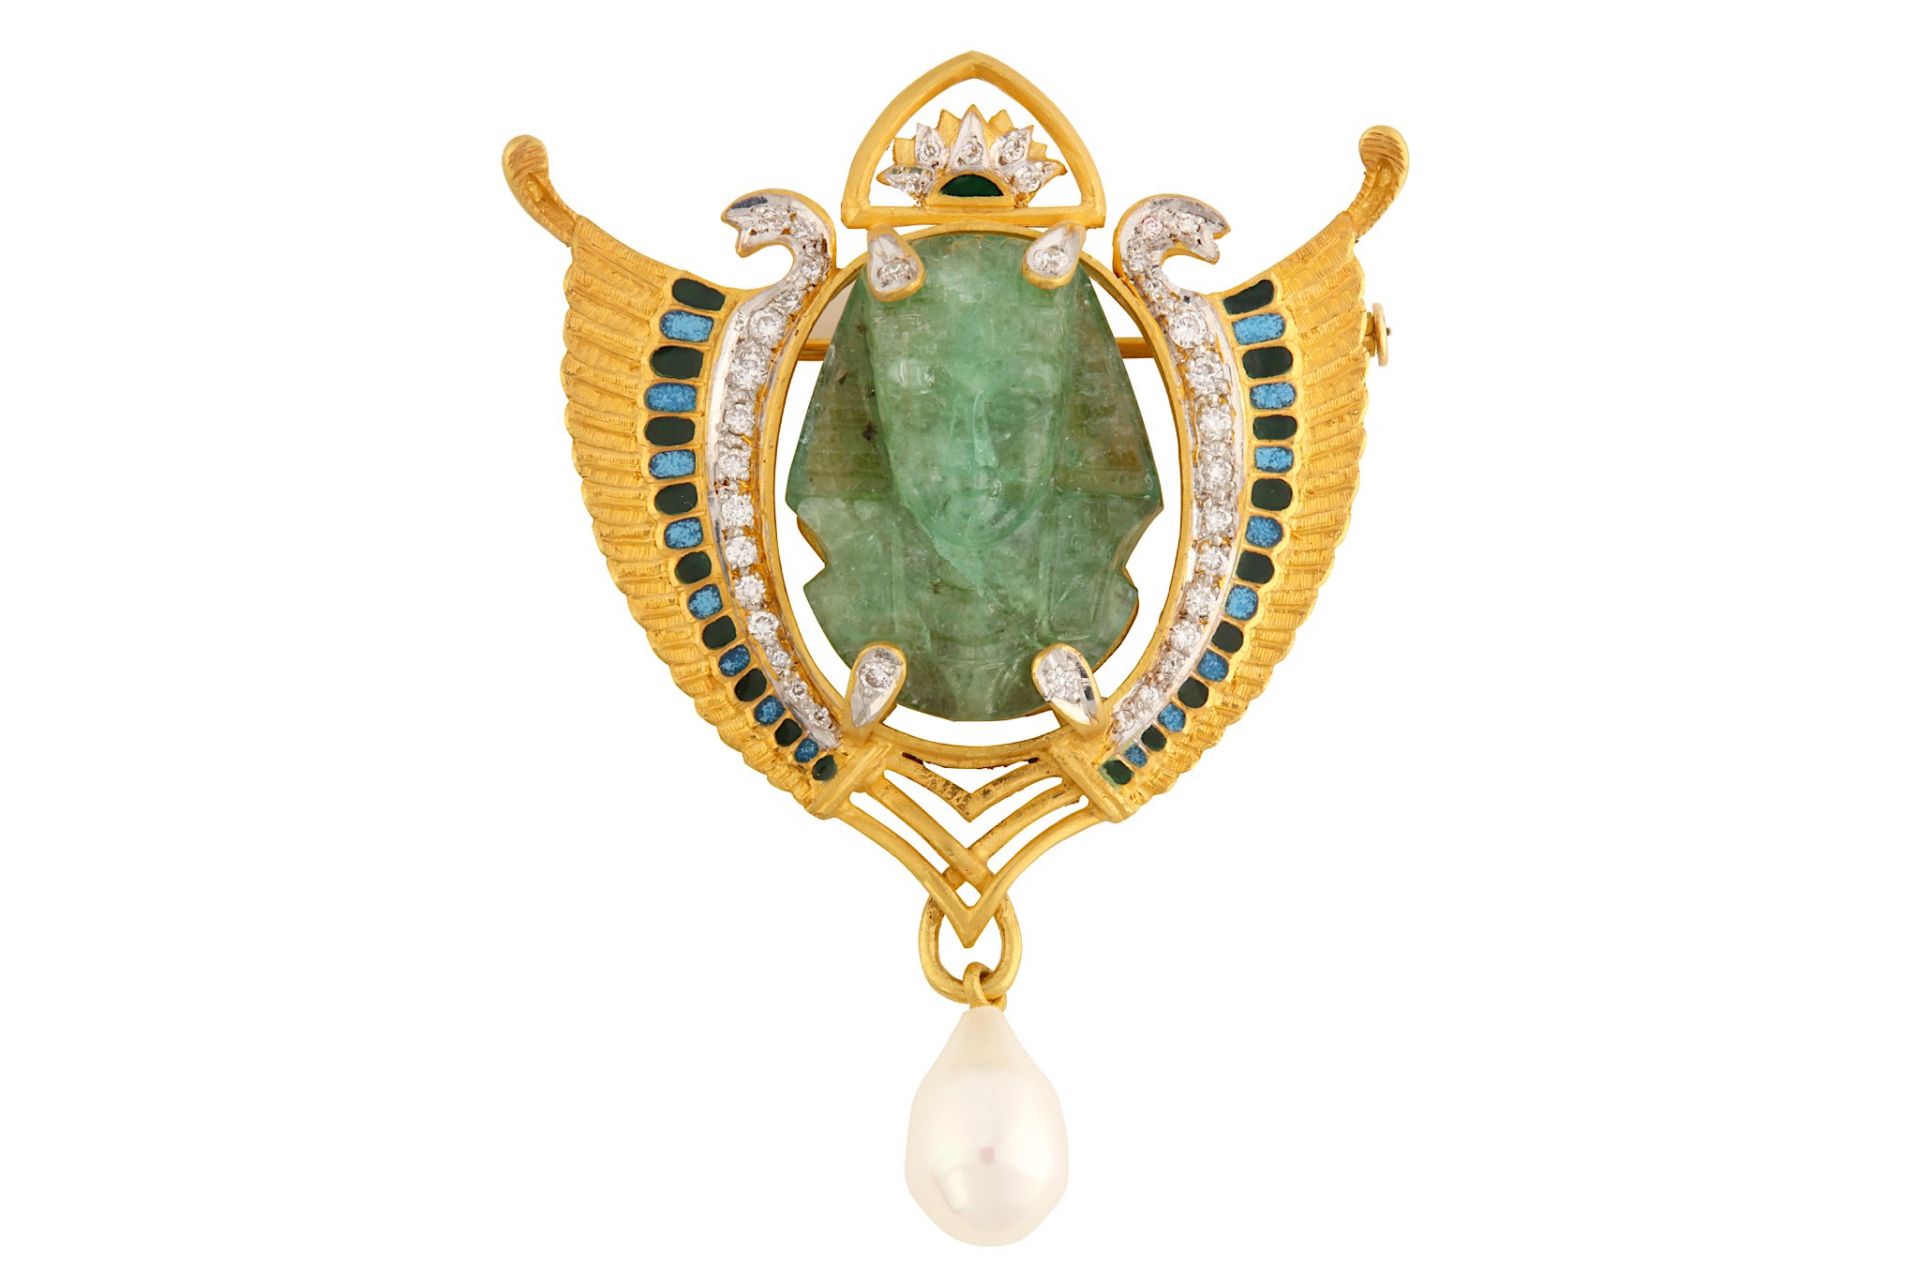 A carved emerald, diamond and enamel brooch